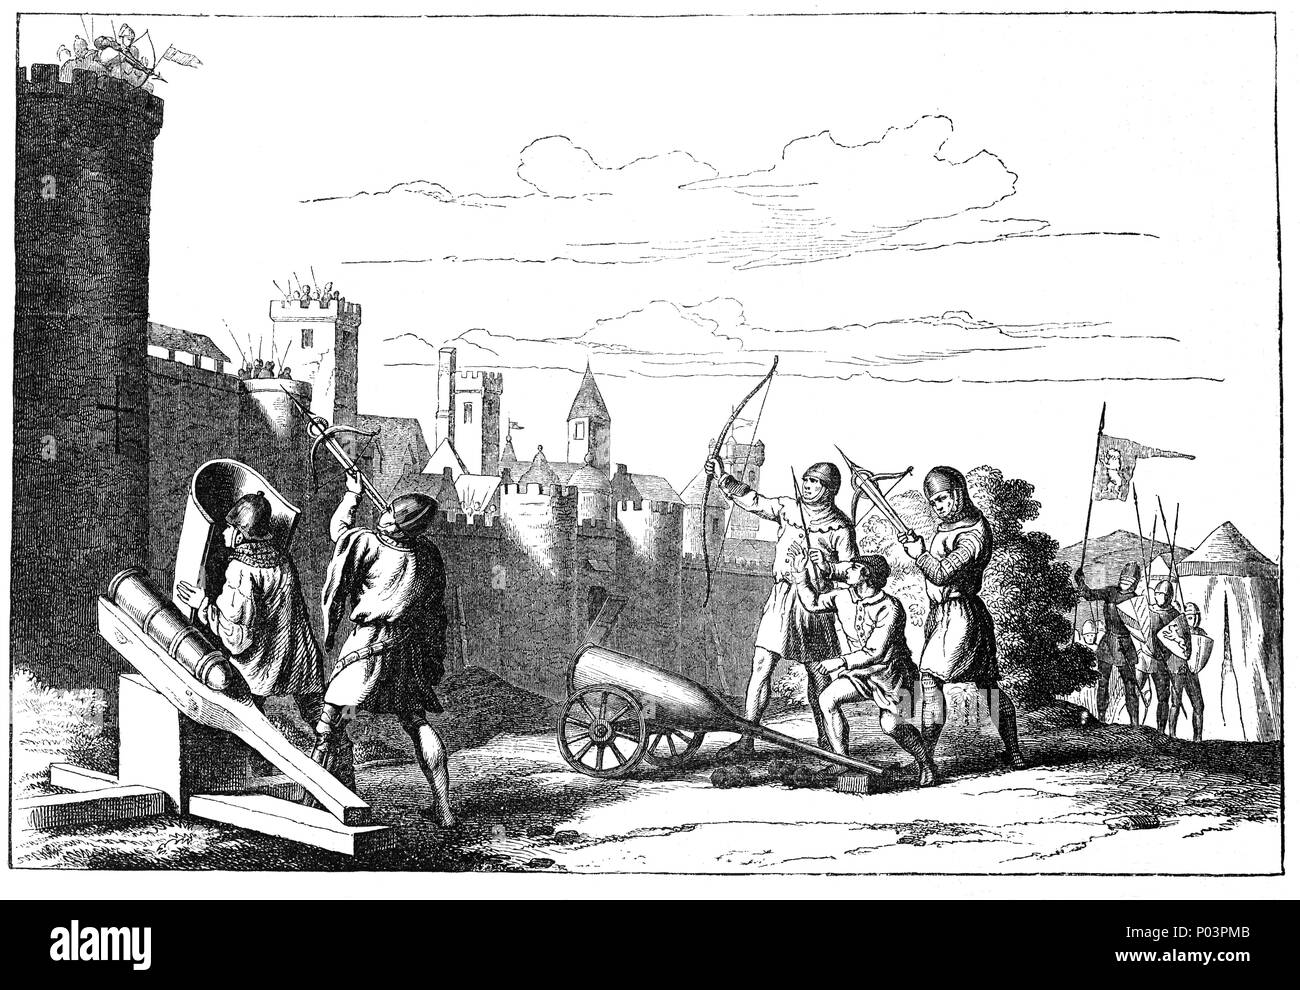 A typical 14th Century siege was a military blockade of a city, or fortress, with the intent of conquering by attrition, or a well-prepared assault. It involves surrounding the target to block the provision of supplies and the reinforcement or escape of troops, coupled with attempts to reduce the fortifications by means of siege engines, artillery bombardment, mining (also known as sapping), or the use of deception or treachery to bypass defenses. Stock Photo